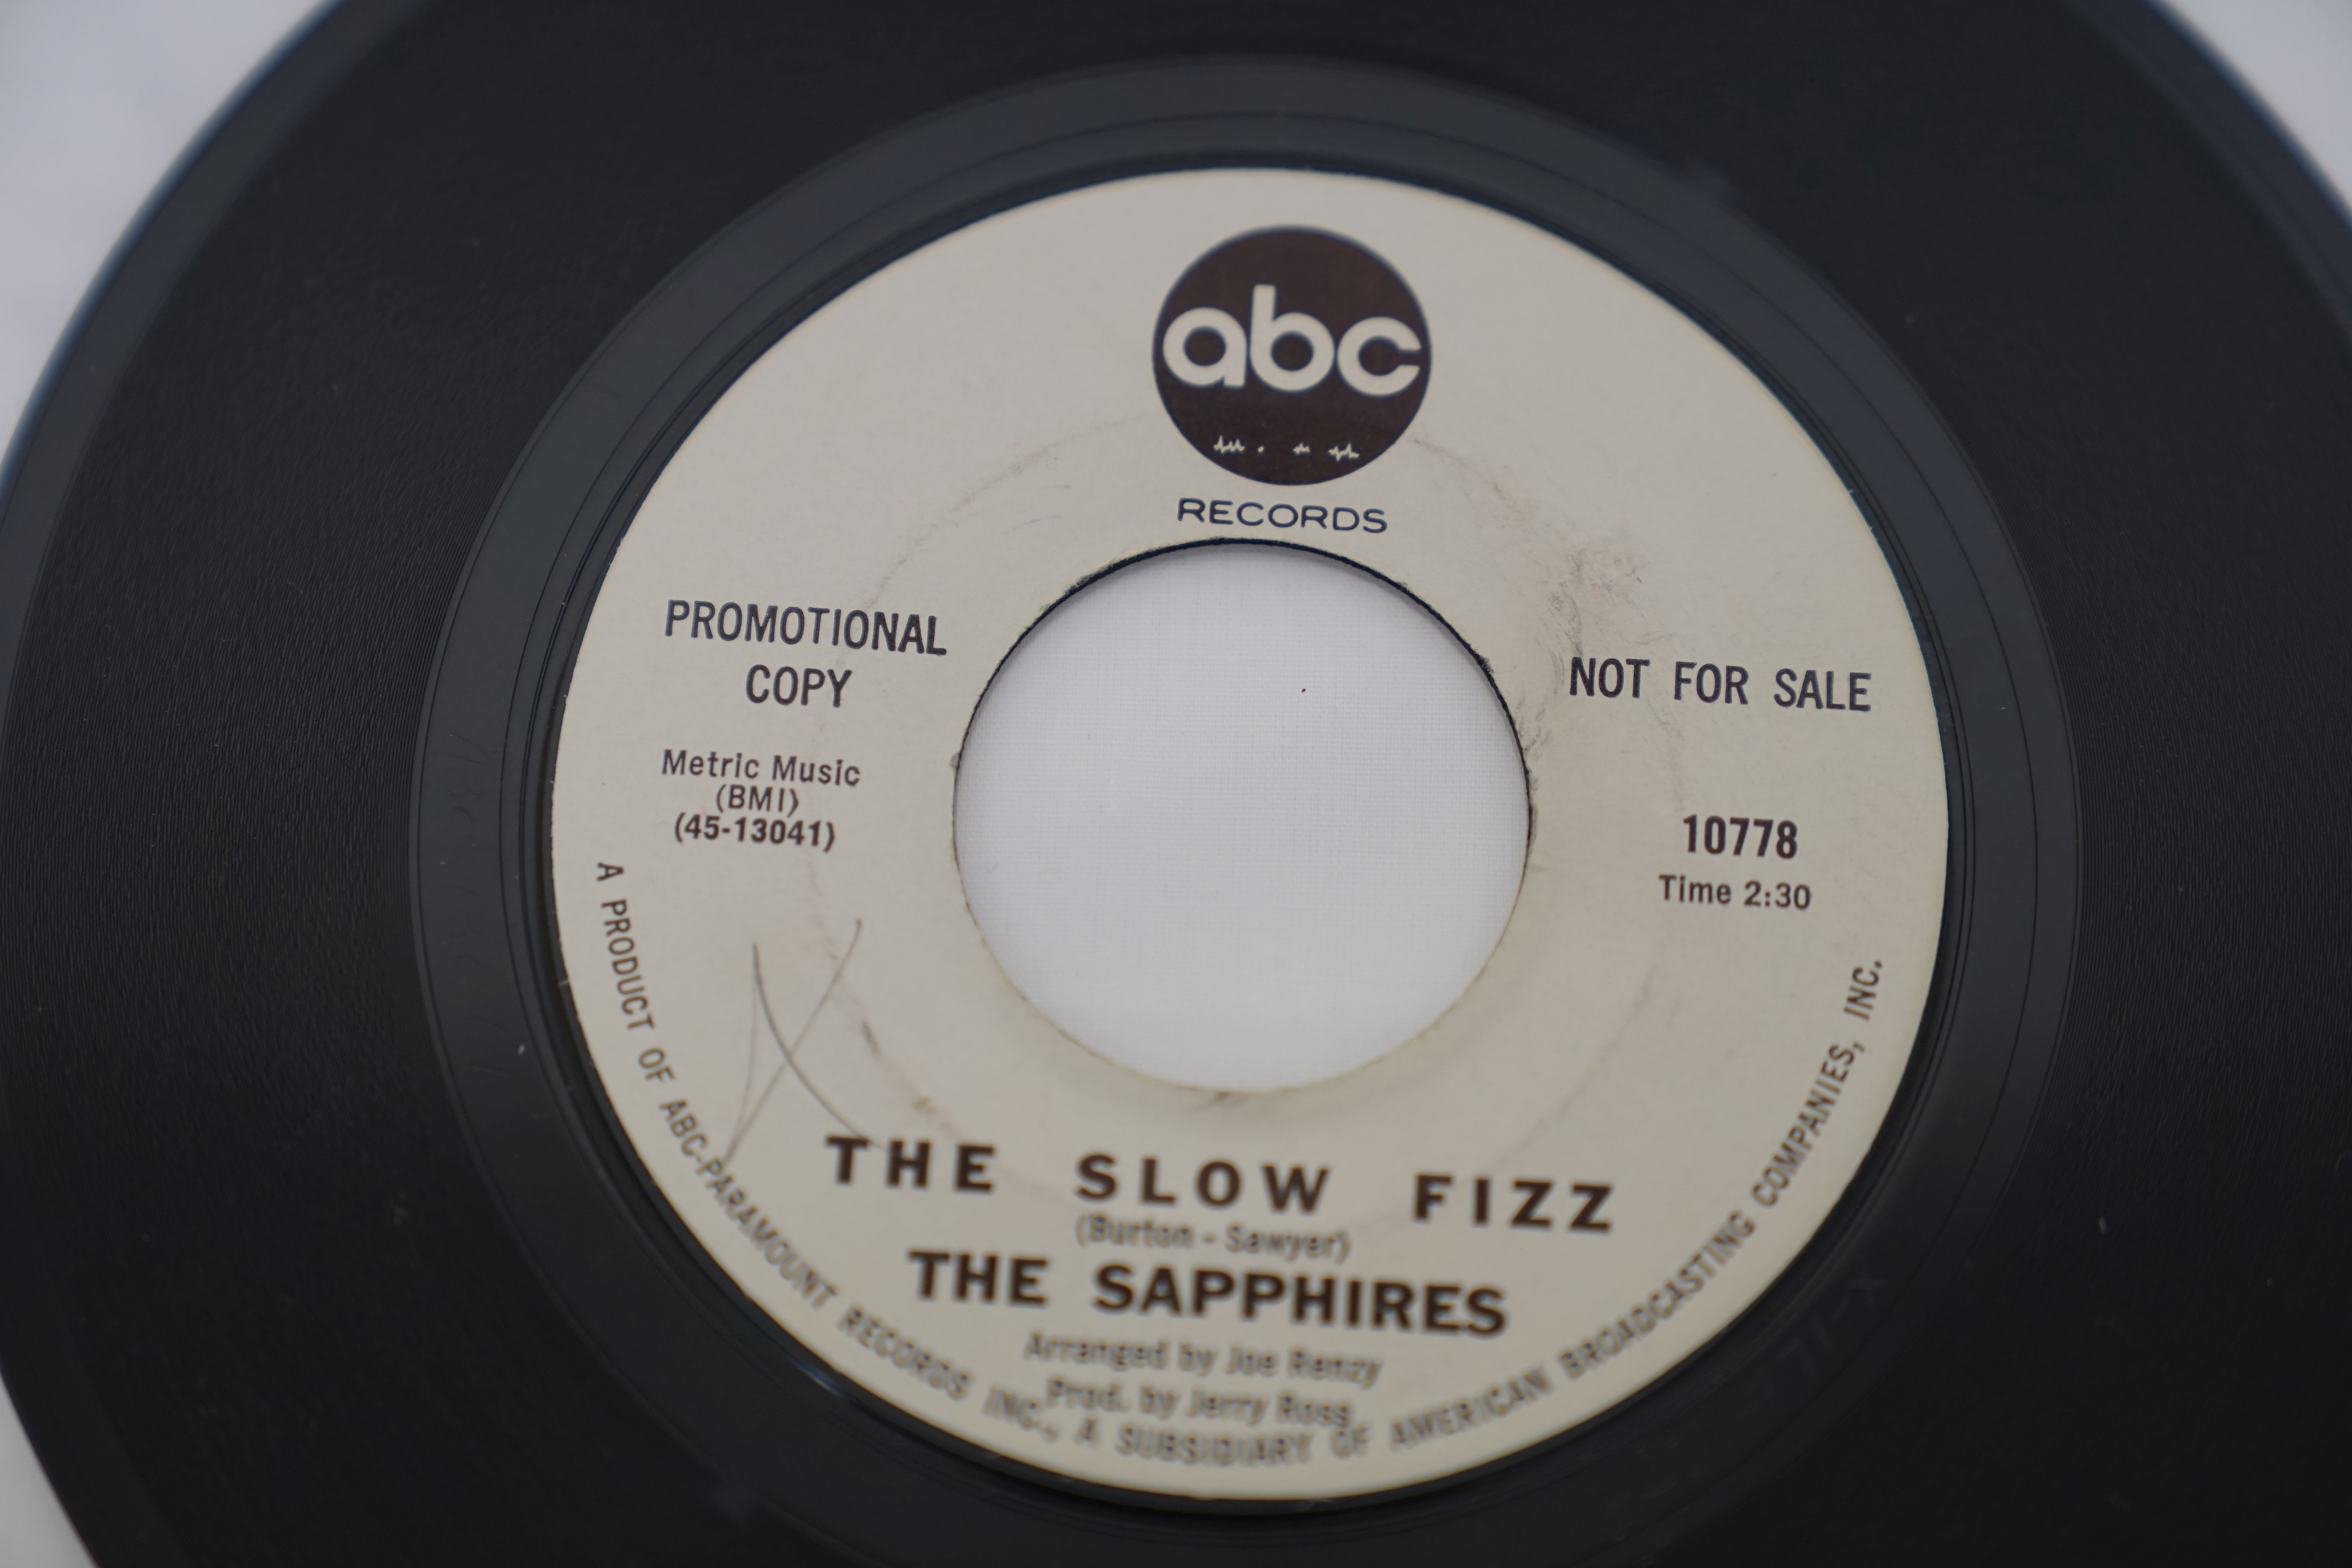 Vinyl - The Sapphires - The Slow Fizz / Our Love Is Everywhere (ABC Records 10778 Promo) NM archive. - Image 3 of 5